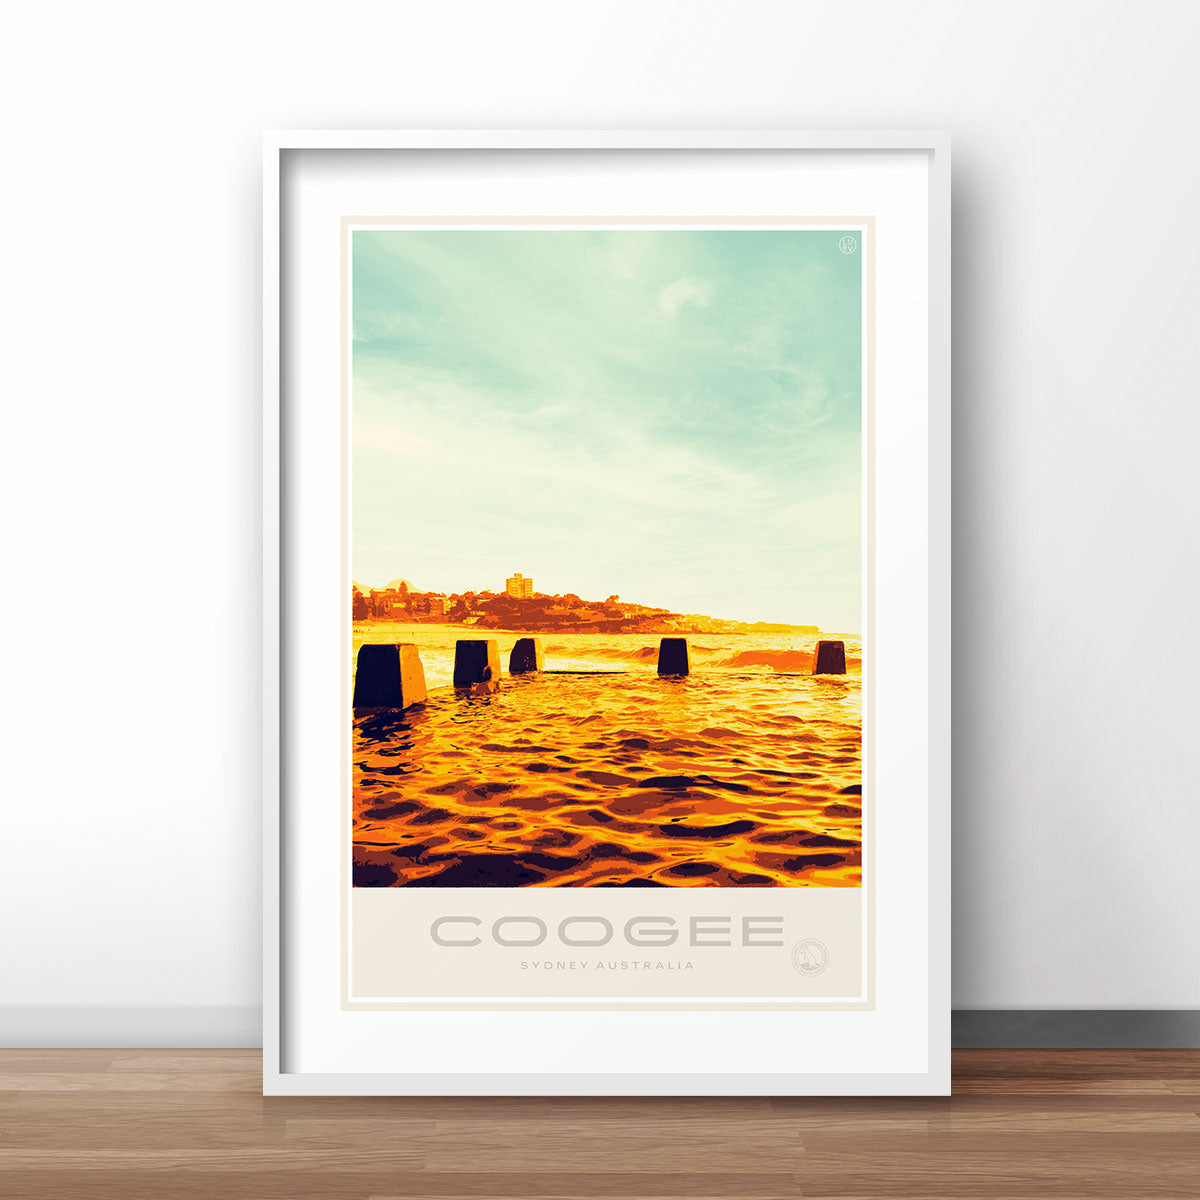 Coogee Pool Sydney vintage travel style poster print by places we luv